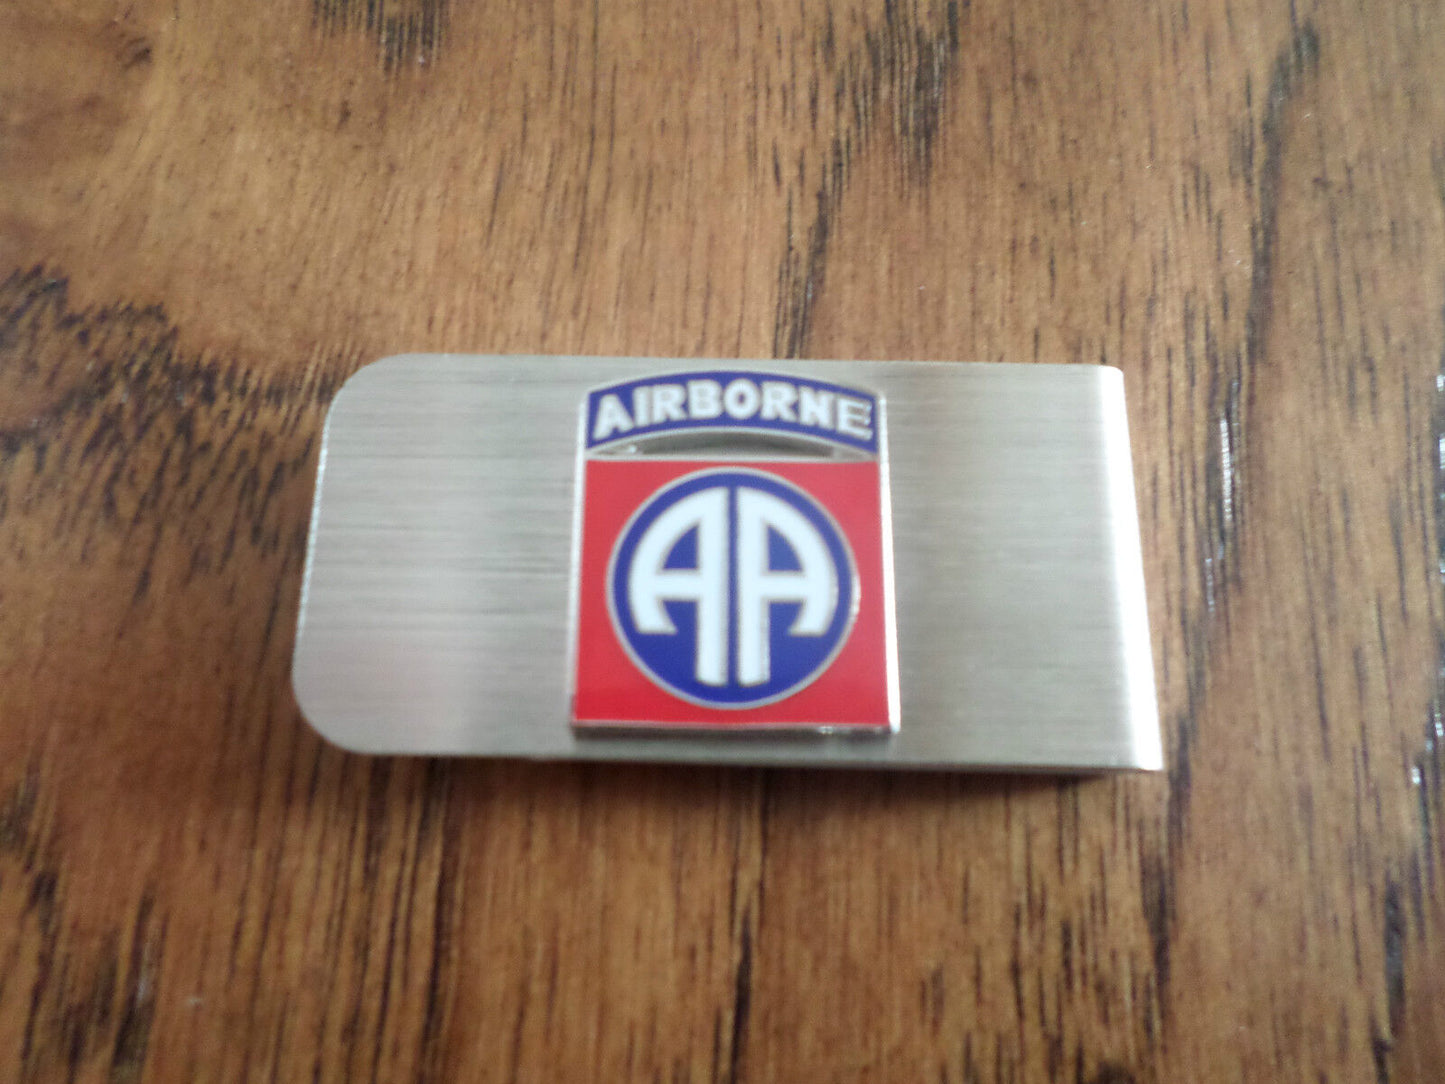 U.S MILITARY ARMY 82ND AIRBORNE DIVISION METAL MONEY CLIP U.S.A MADE